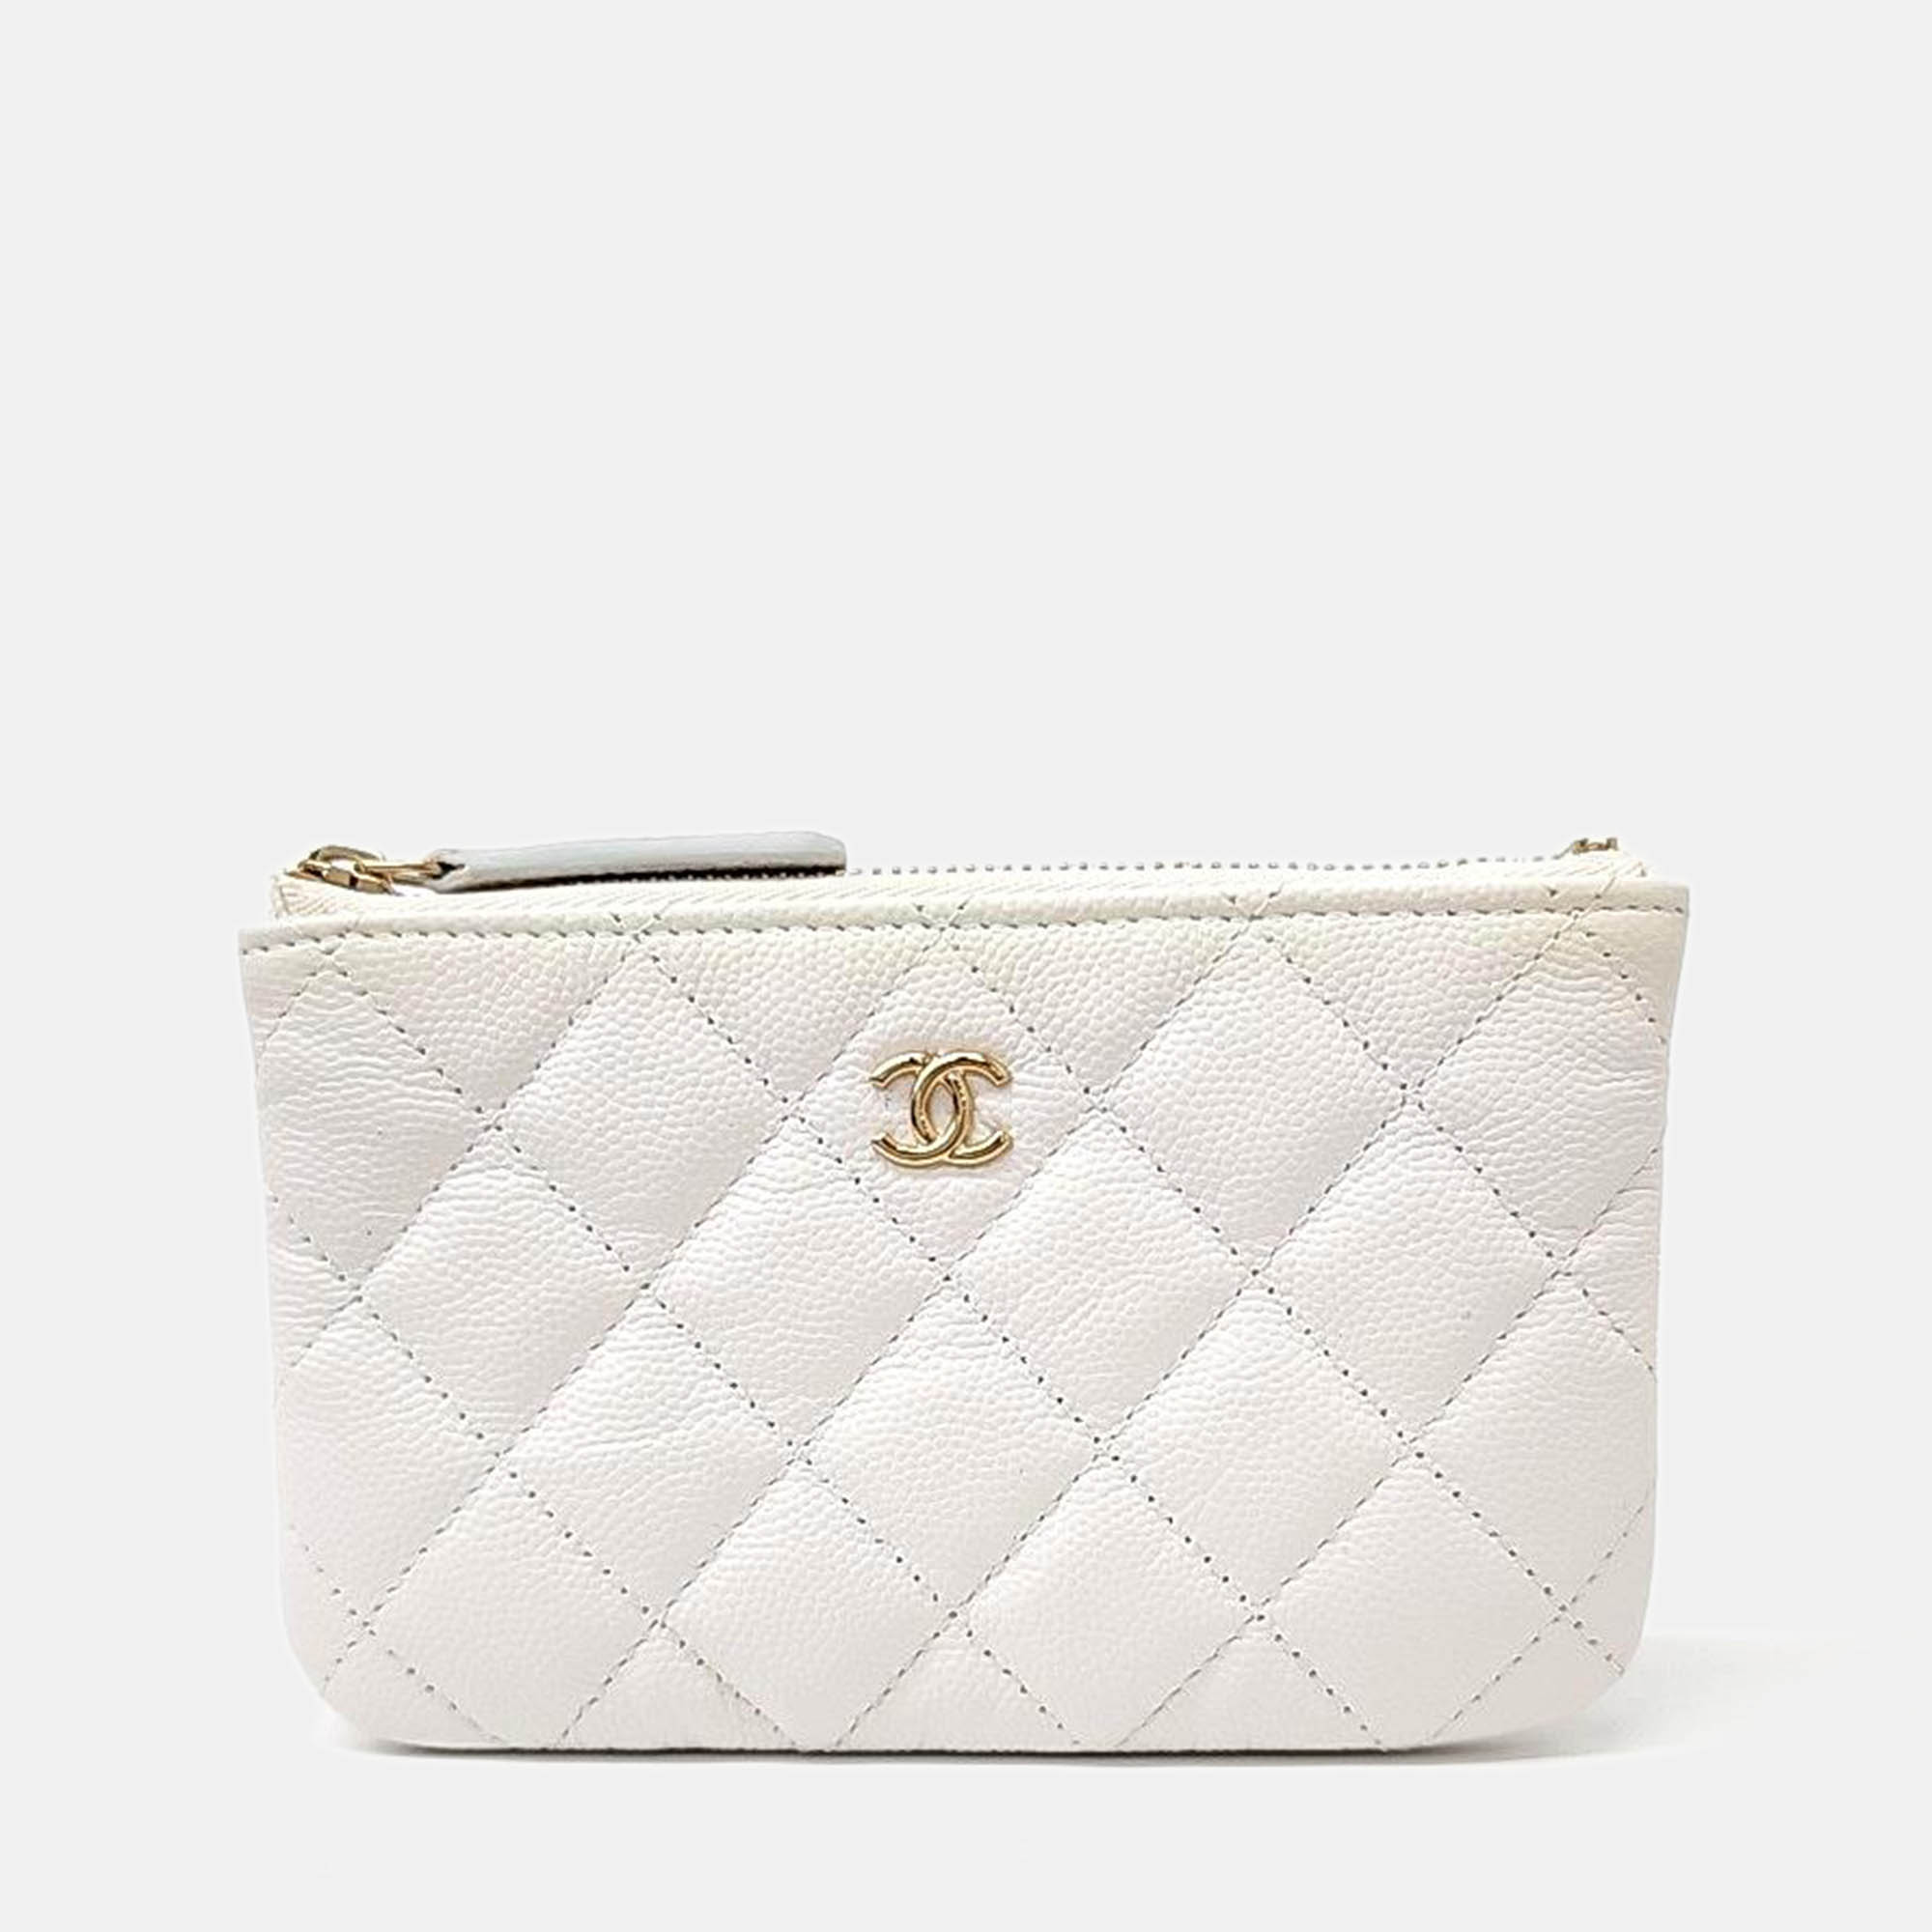 Chanel white caviar quilted small pouch